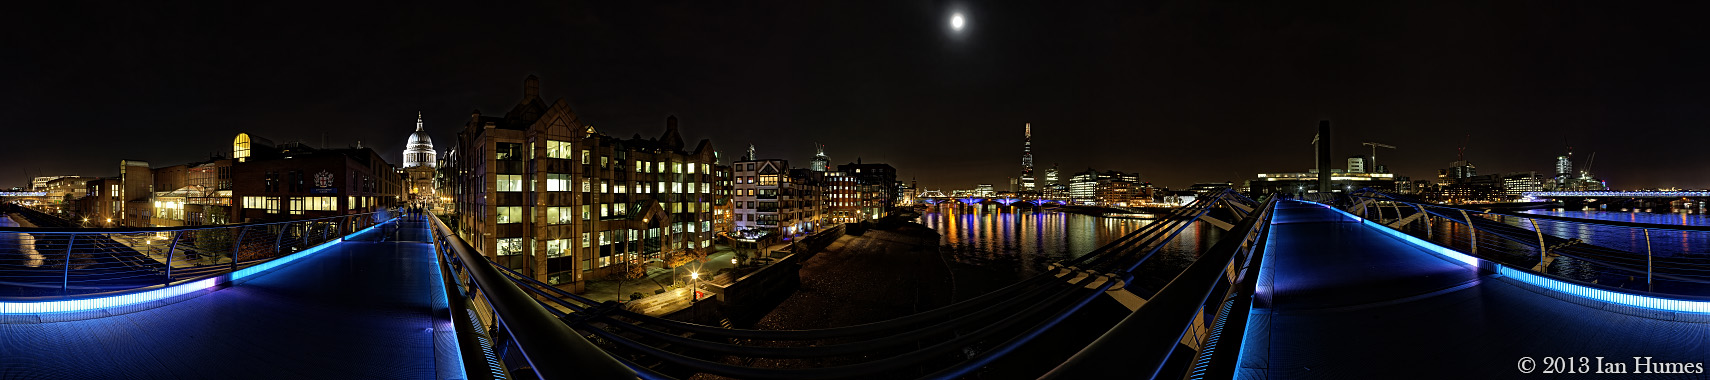 The Shard, St. Pauls Cathedral and the `Walkie Talkie` building photographed from the Millennium Bridge at night - London